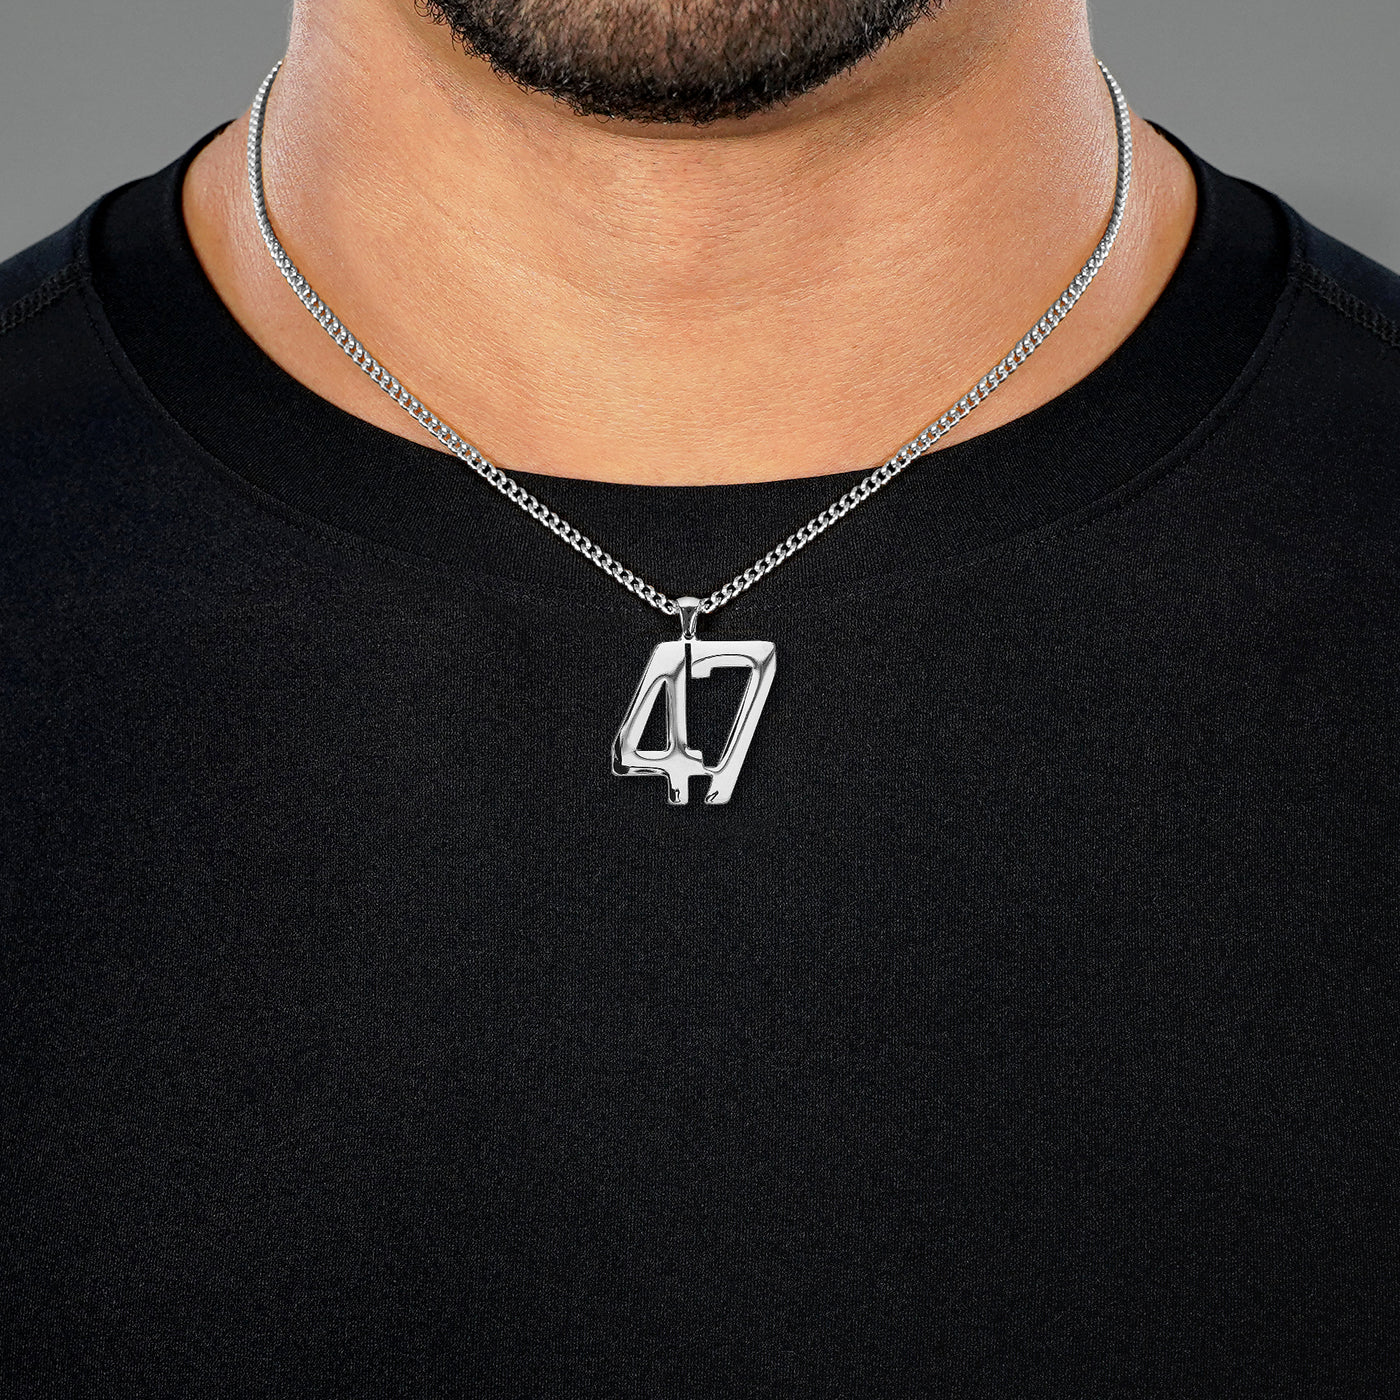 47 Number Pendant with Chain Necklace - Stainless Steel